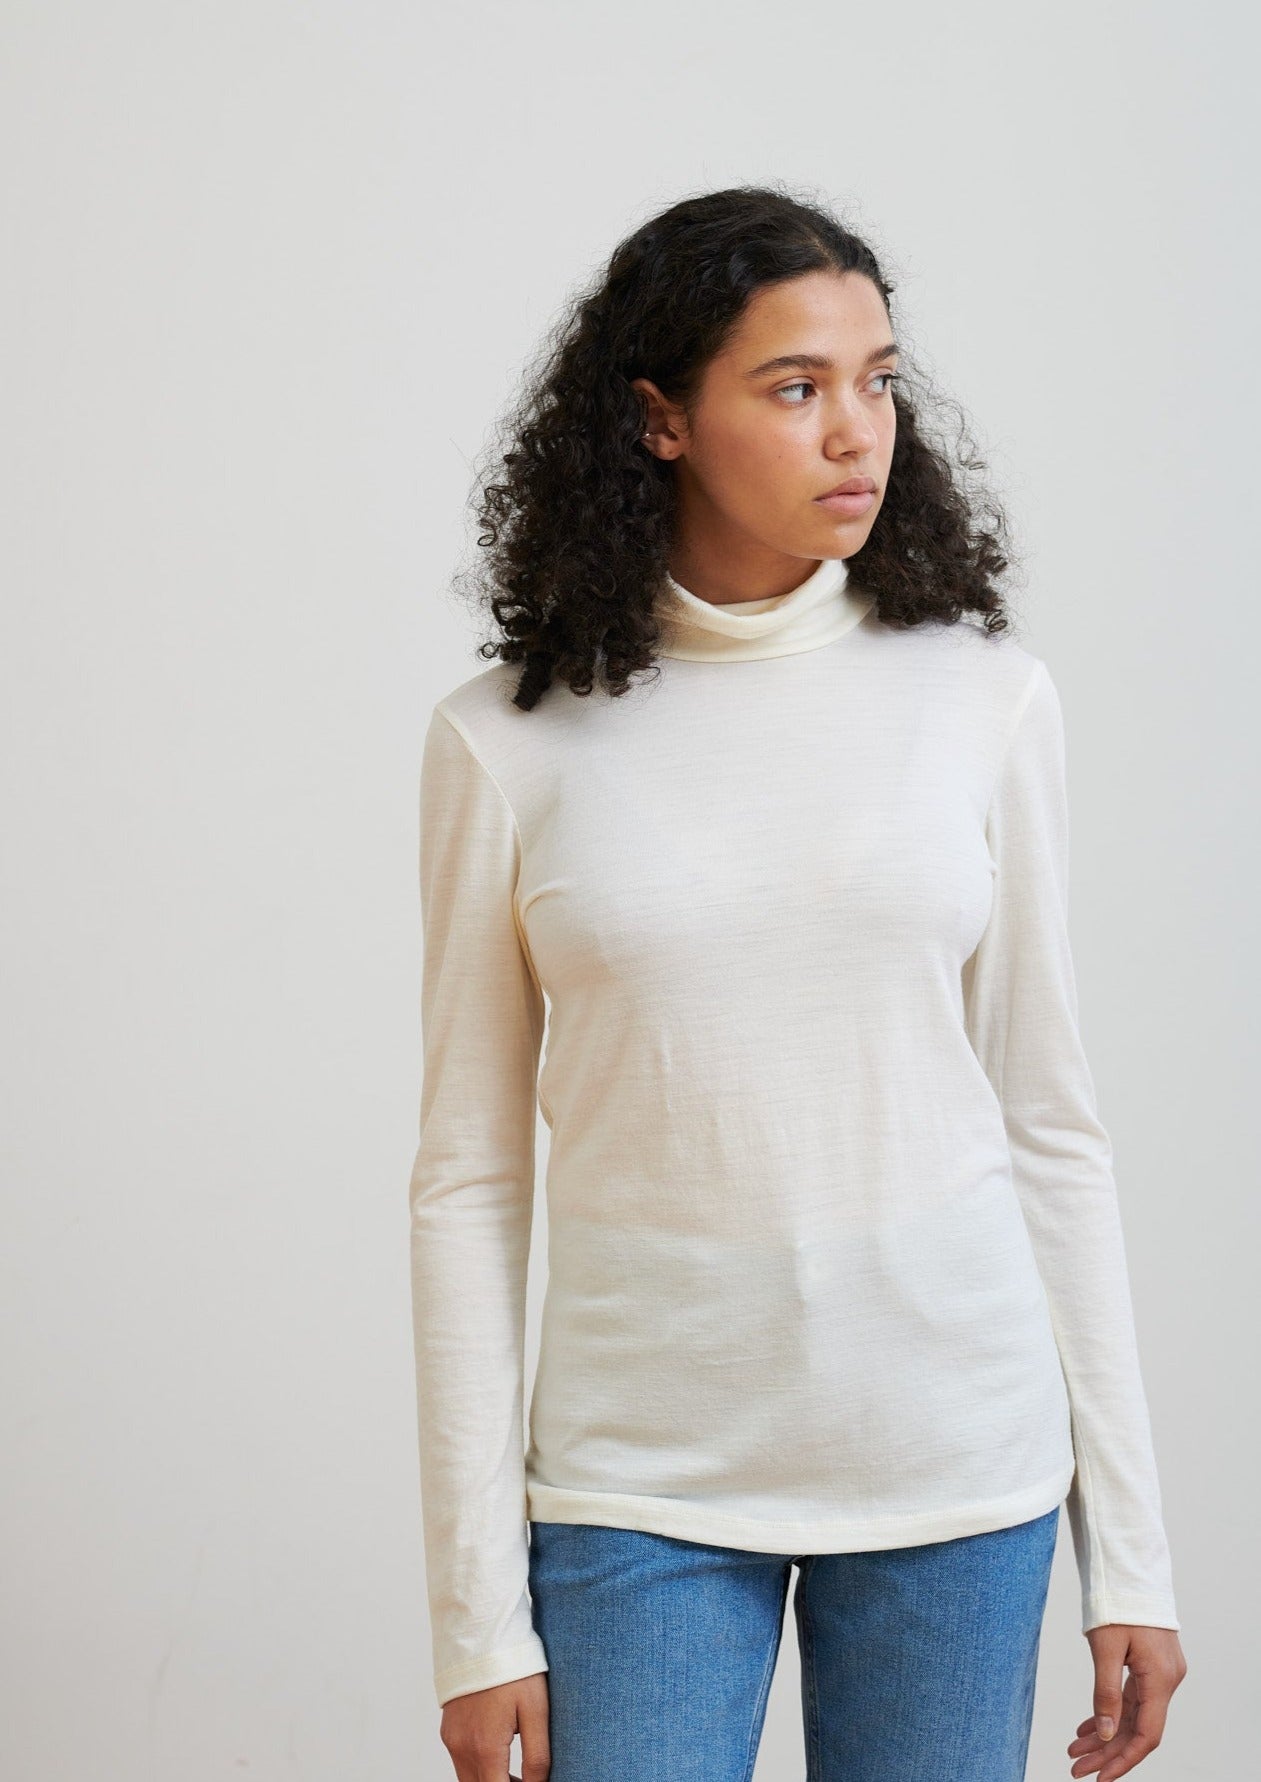 A timeless turtleneck, this layering essential in ethical wool is soft and breathable to wear all seasons. 